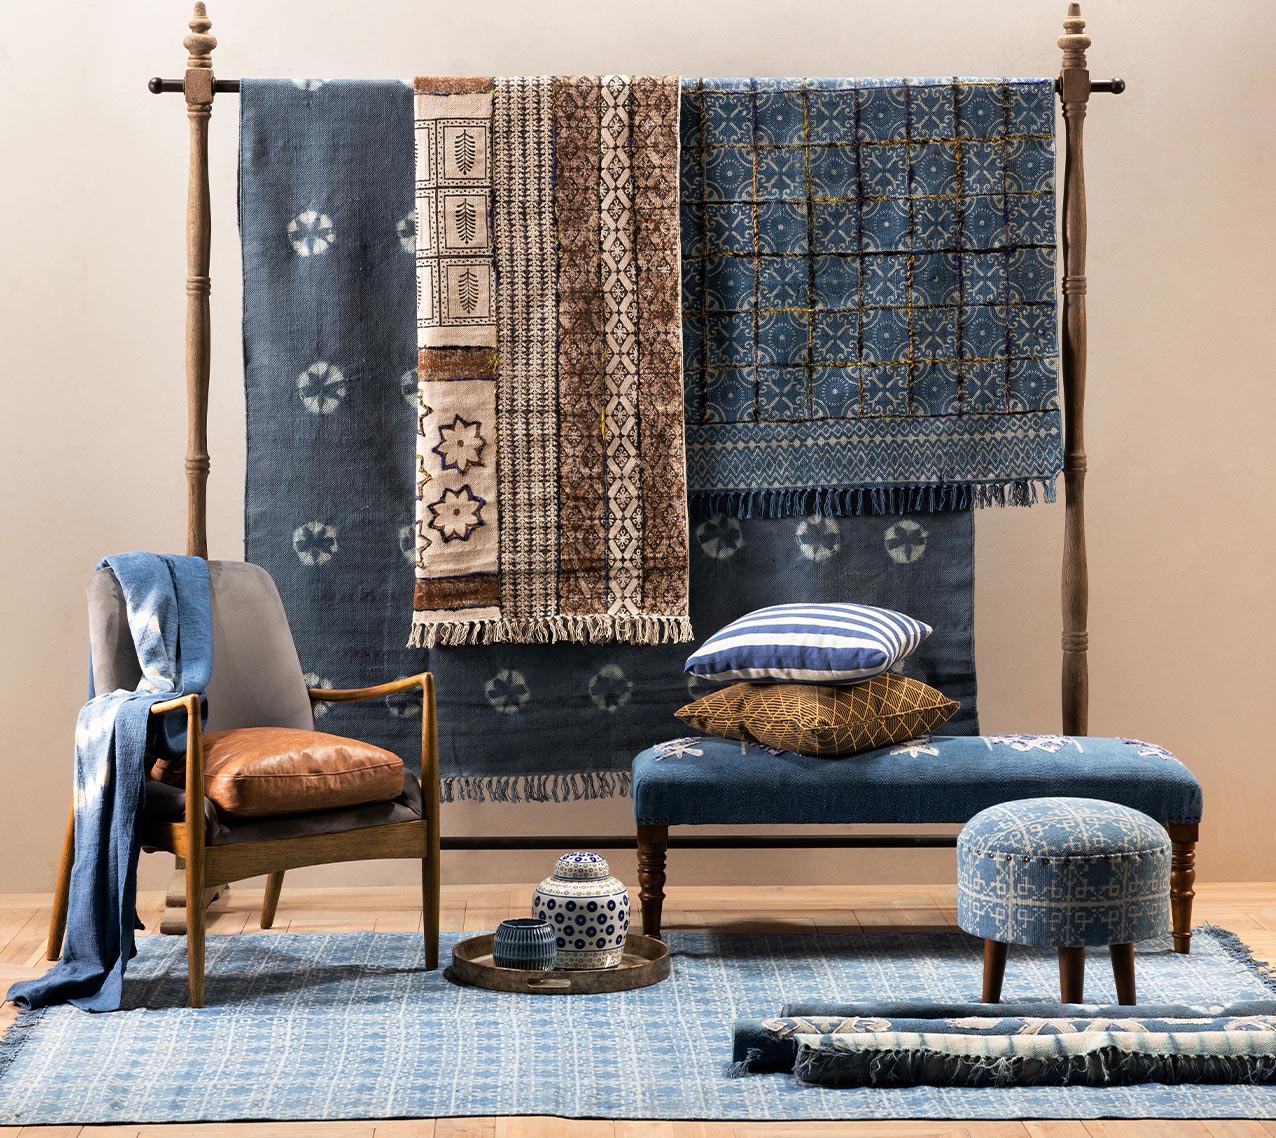 Natural Selection - Indus Collection of rugs, benches, stools and throws